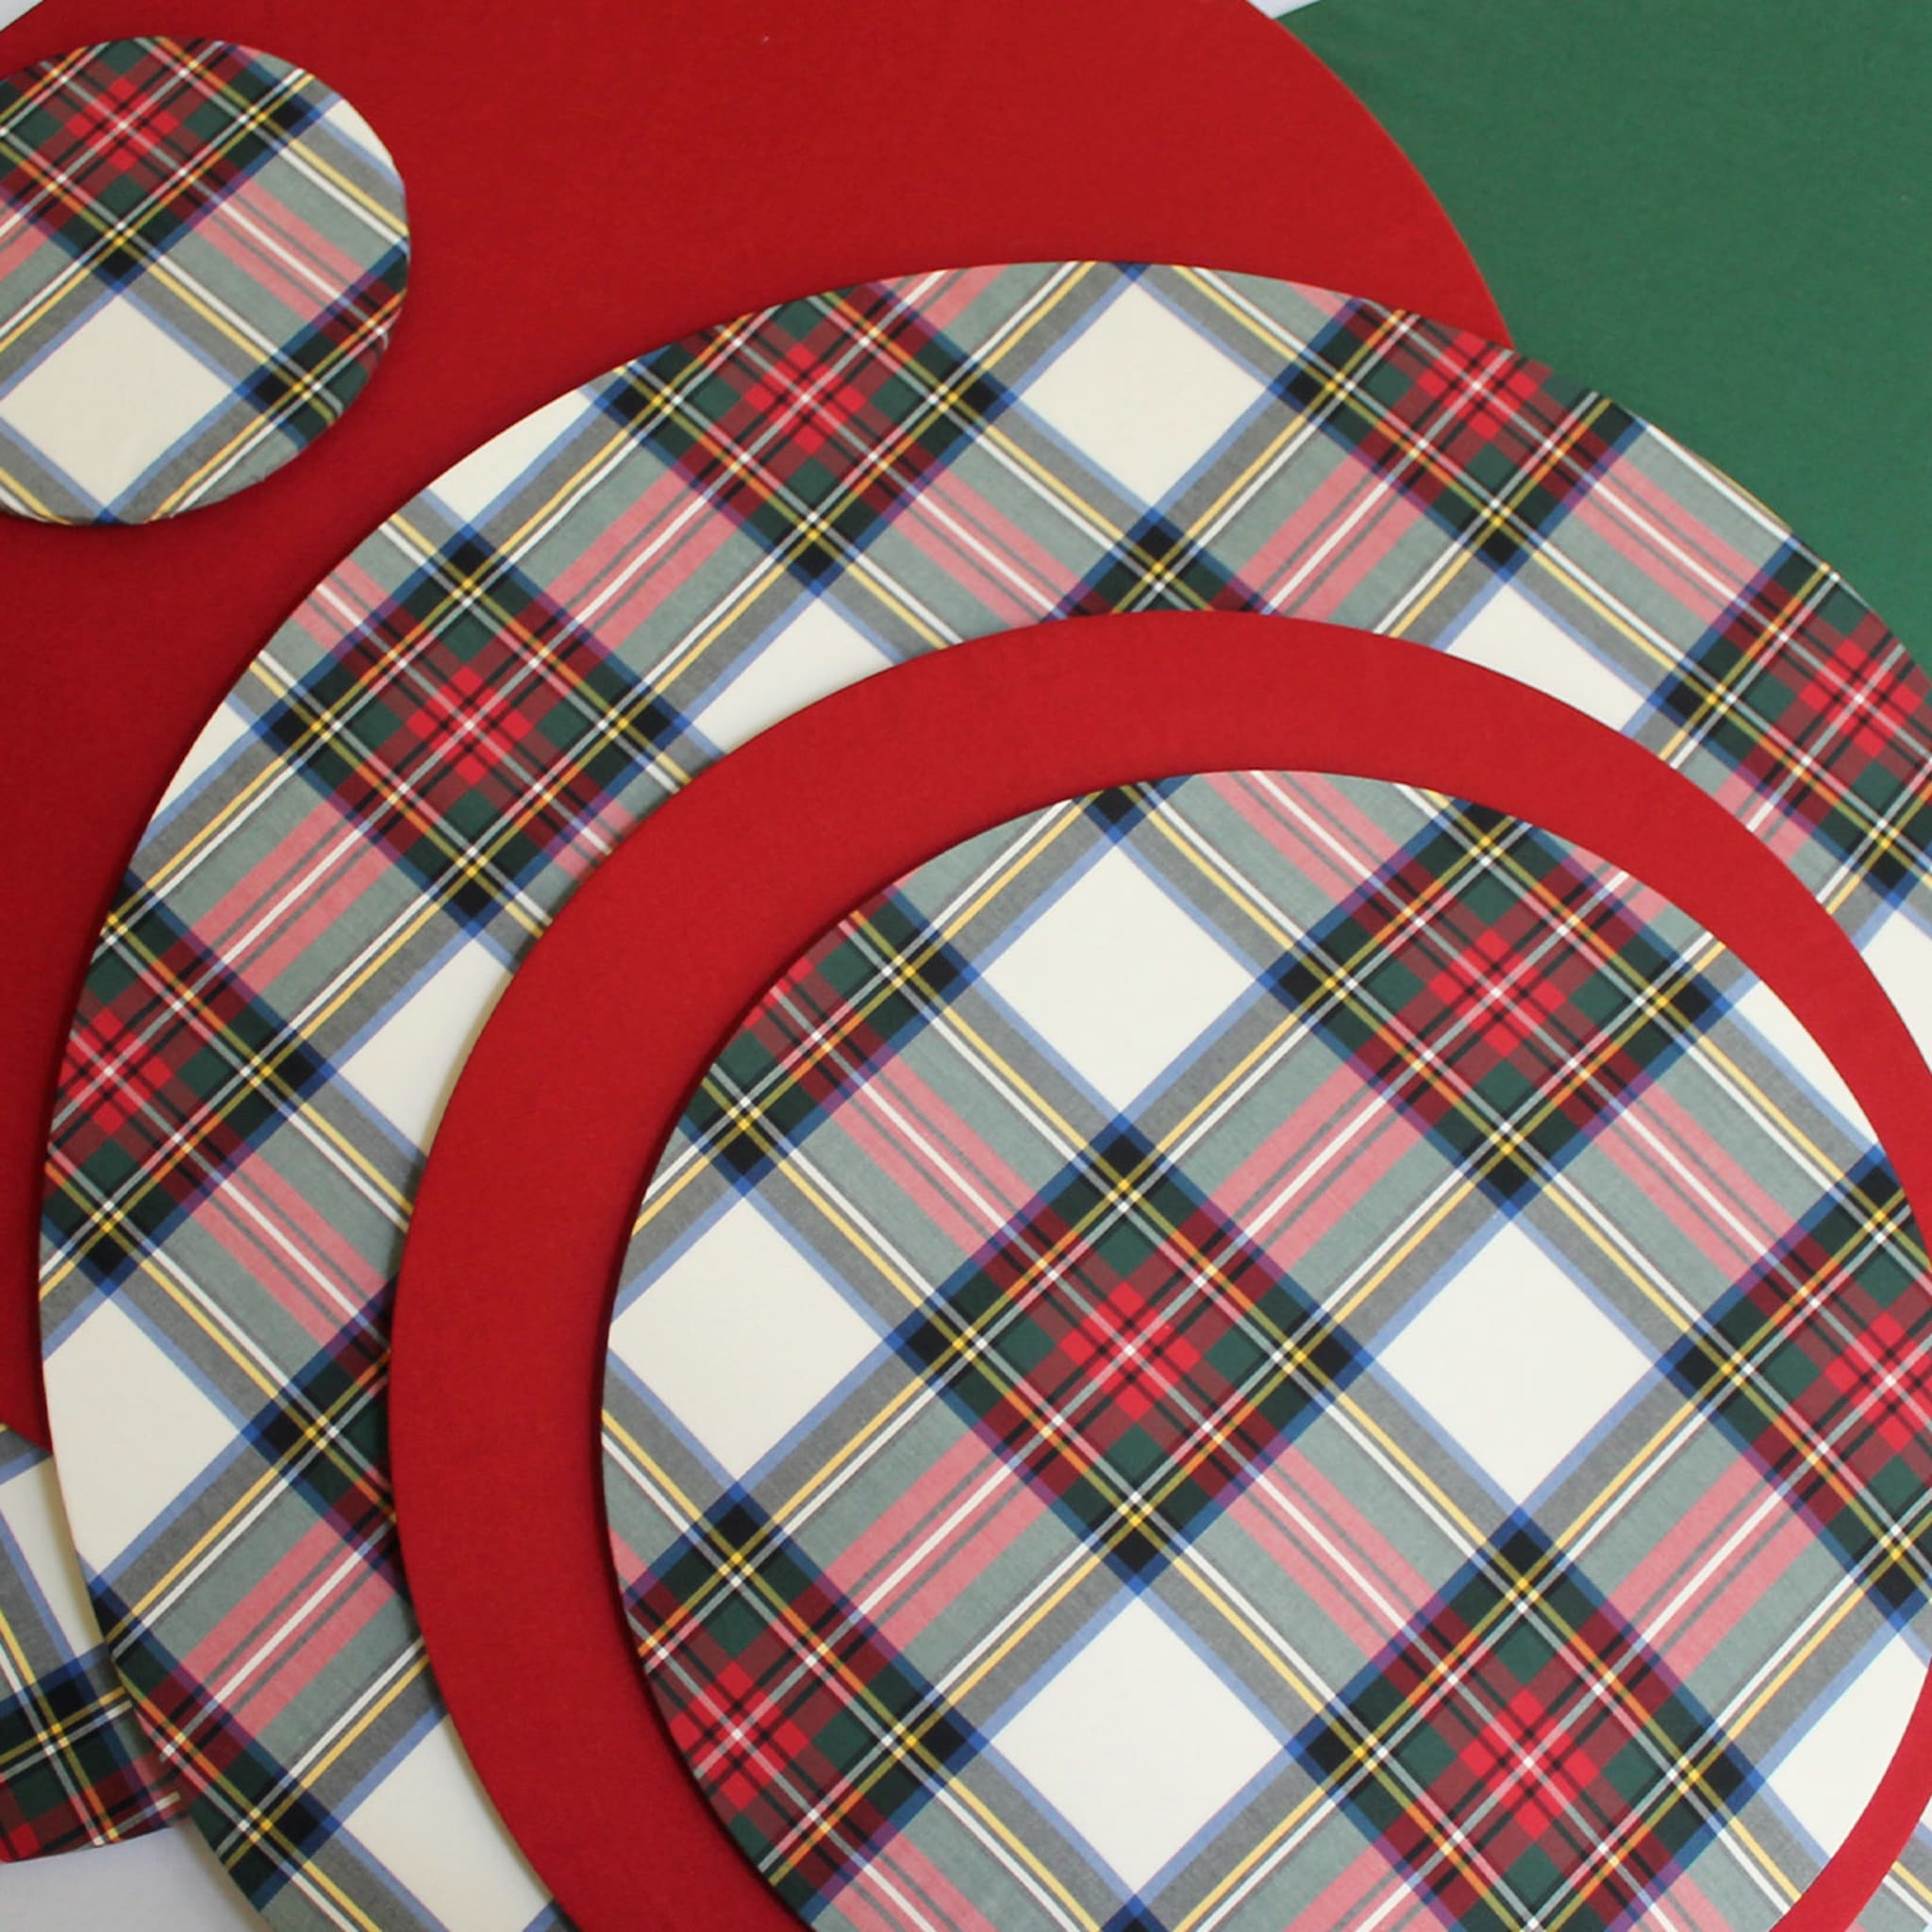 Set of 2 Cuffiette Extra-Small Round Tartan Placemats - Alternative view 1